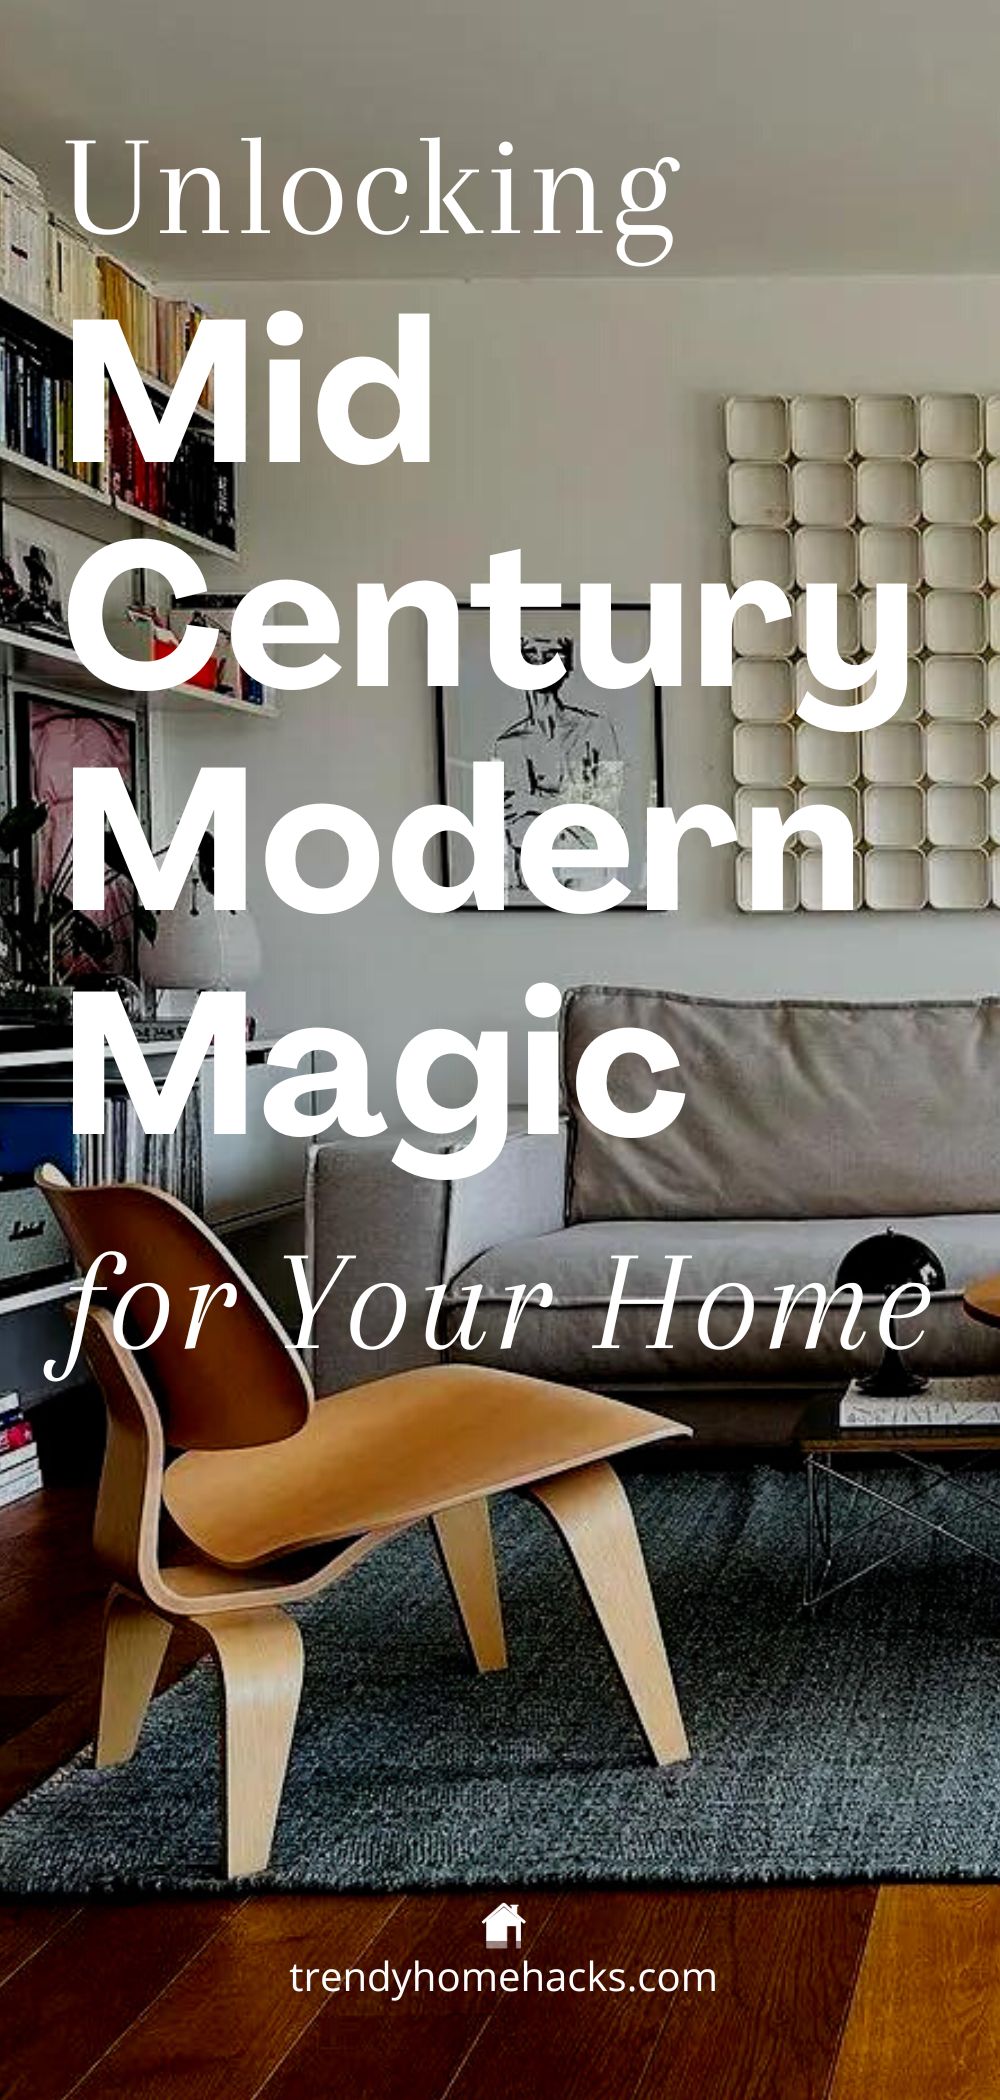 Pinterest pin on the topic of unlocking the mid century modern magic for your home